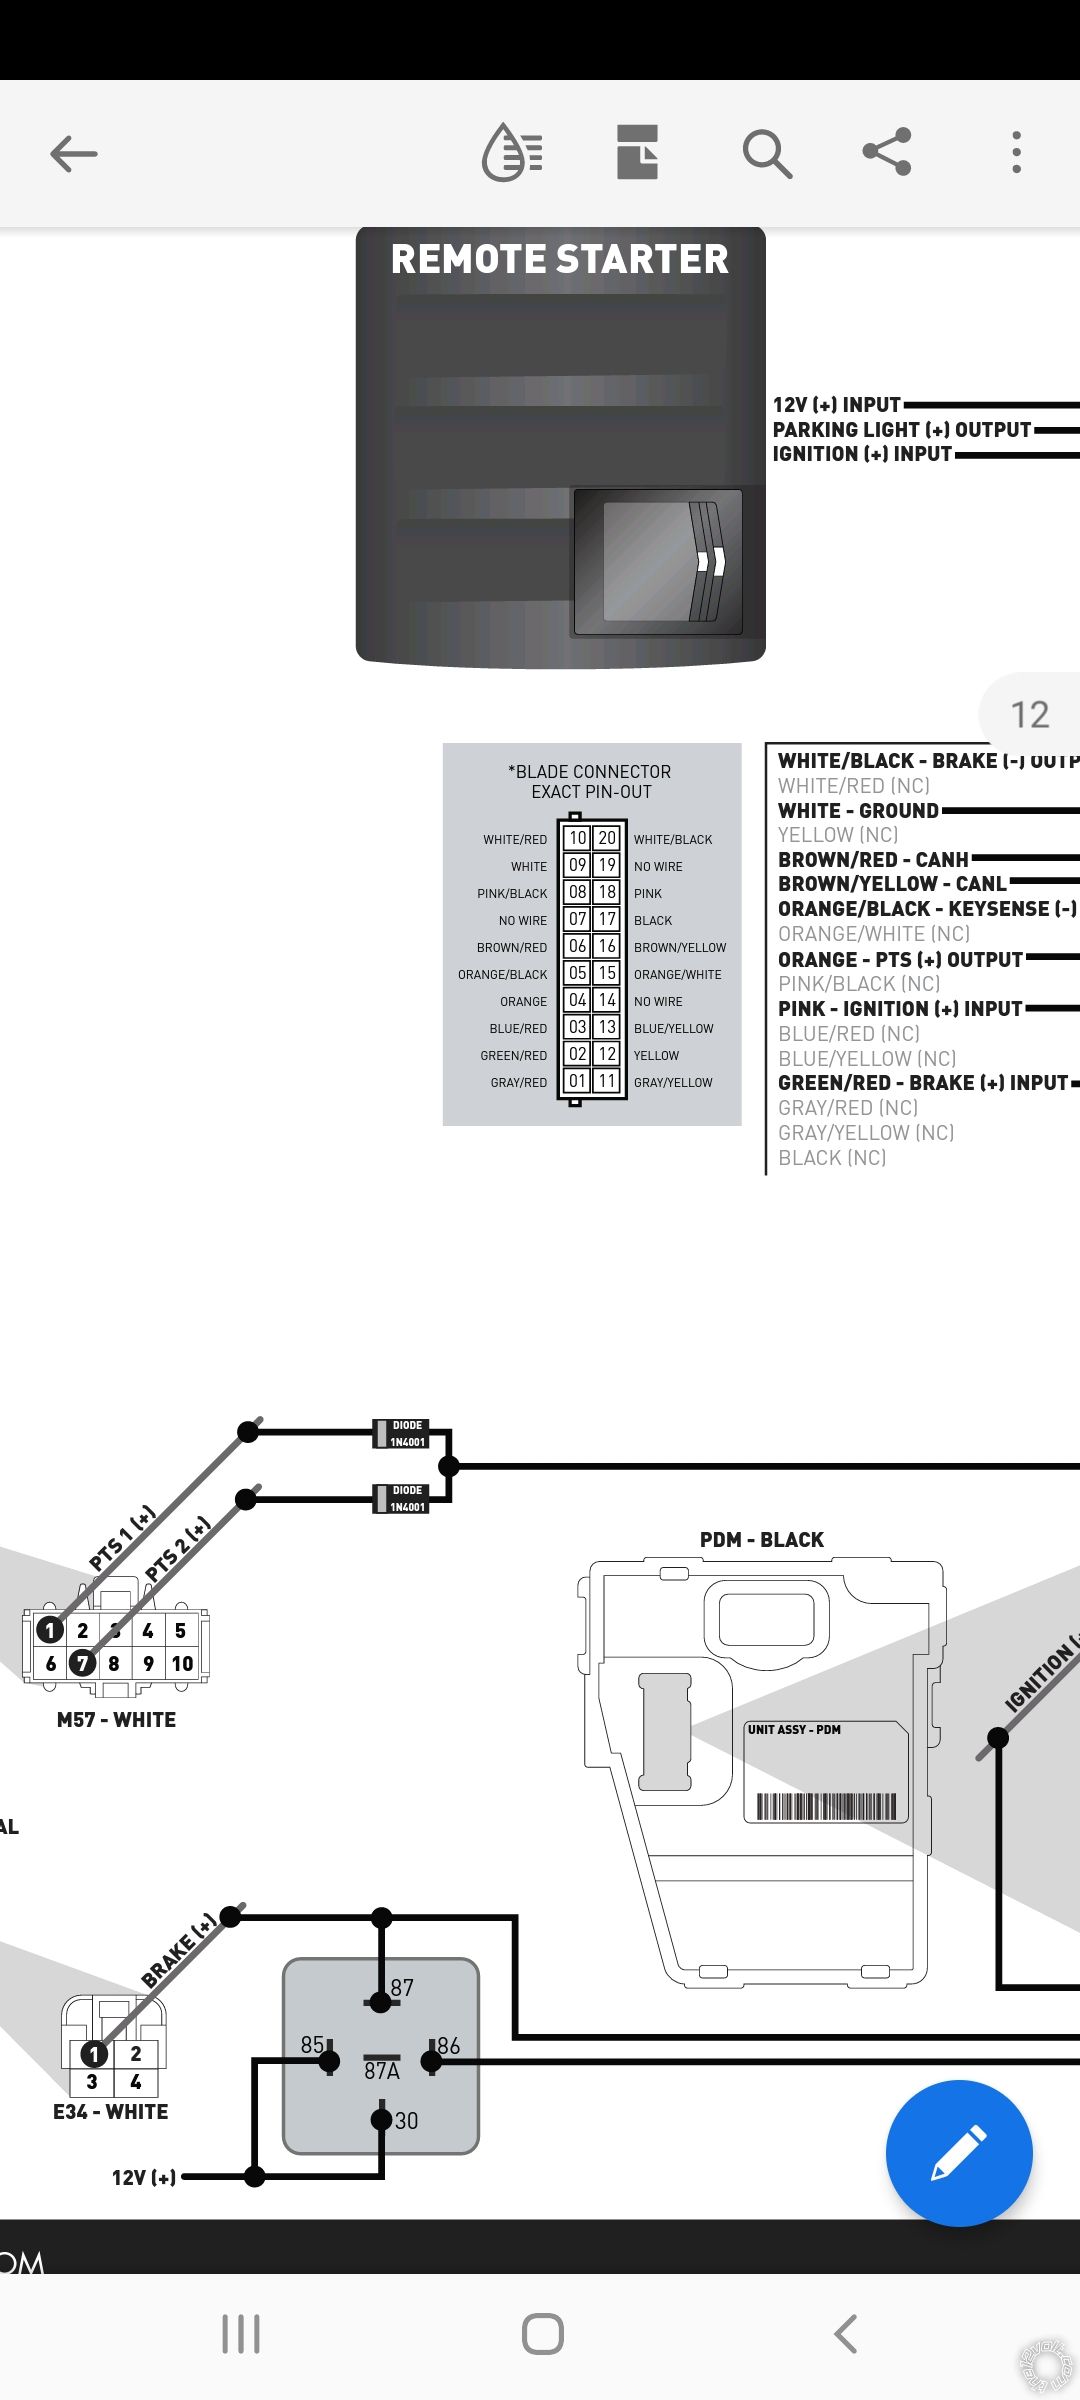 Remote Start Brake Switch Relay - Last Post -- posted image.